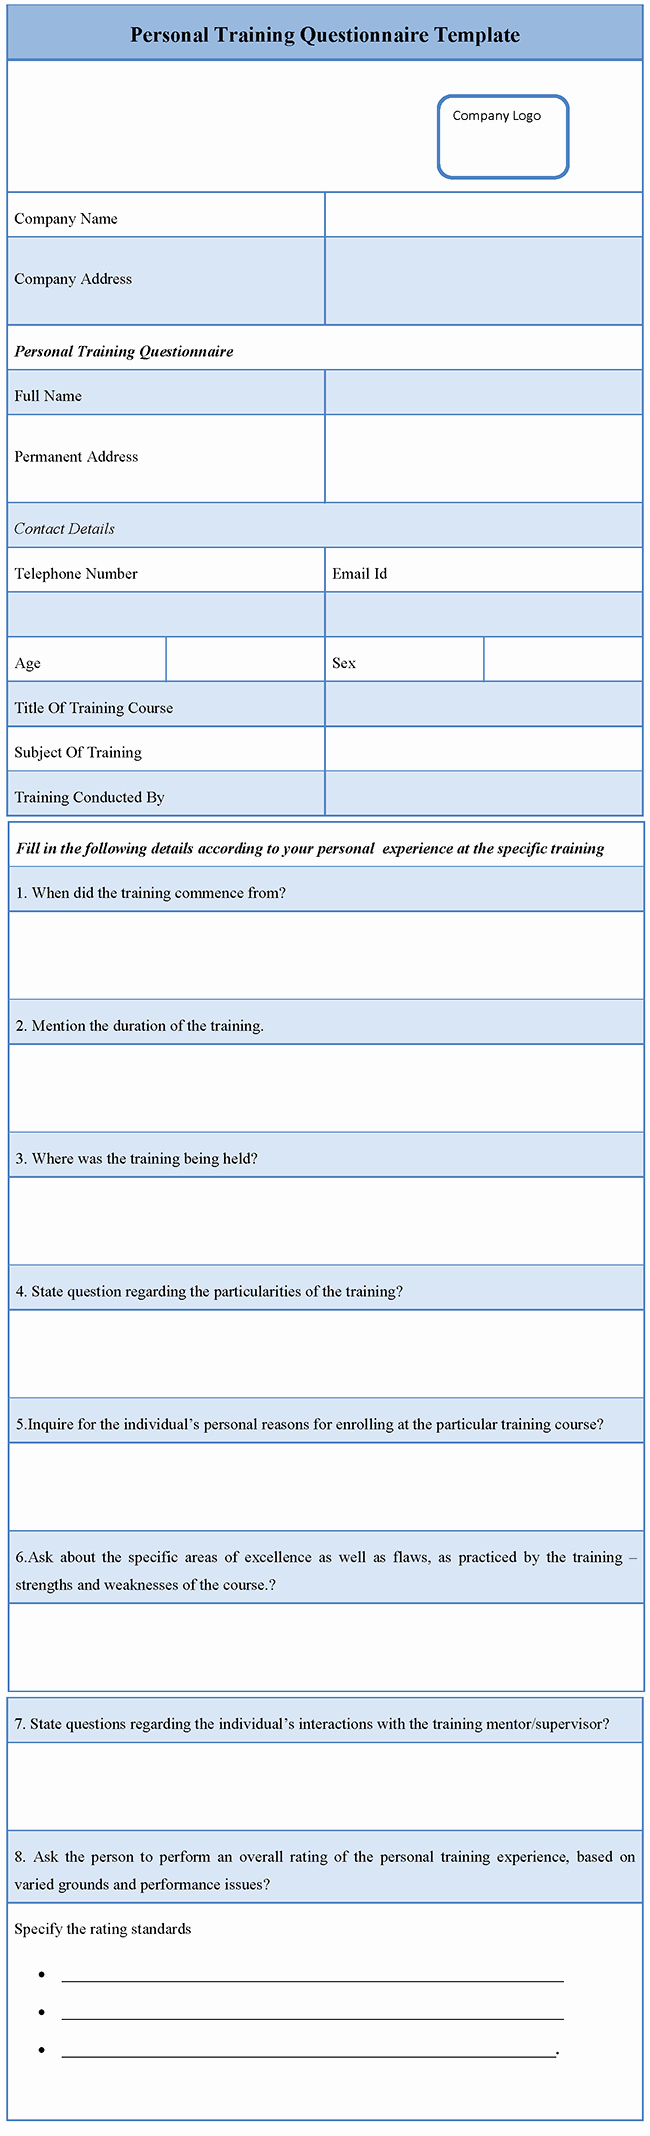 Personal Training Questionnaire Template